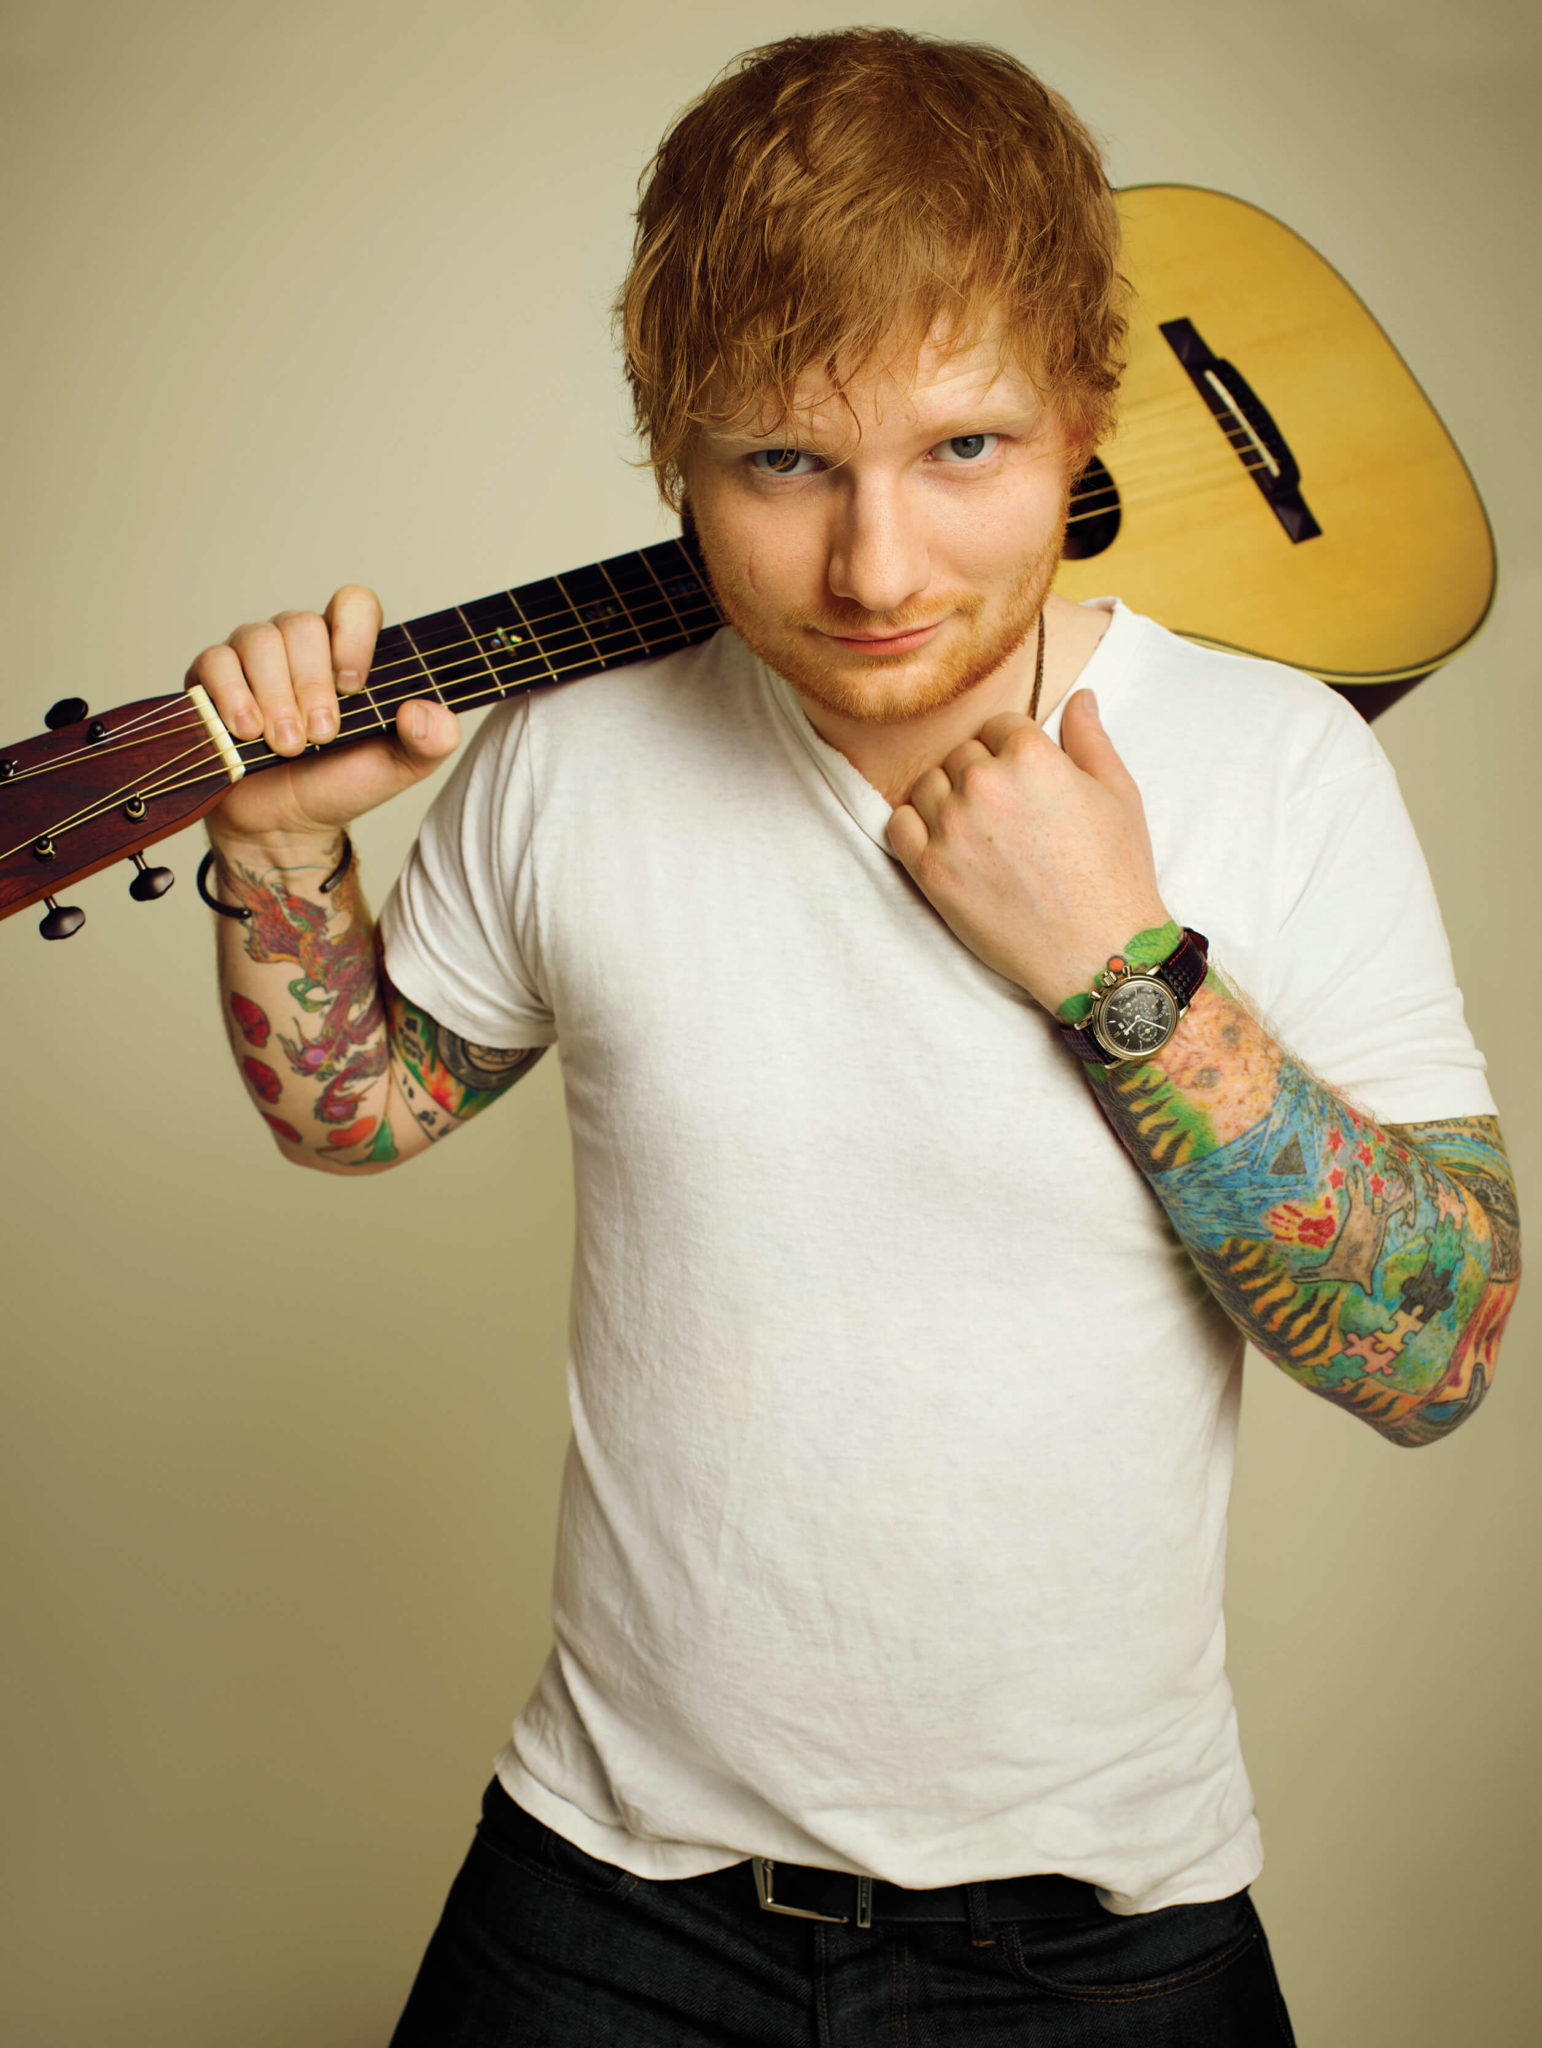 Ed Sheeran Biography Wiki, Age, Wife, Songs, Net Worth & Pictures